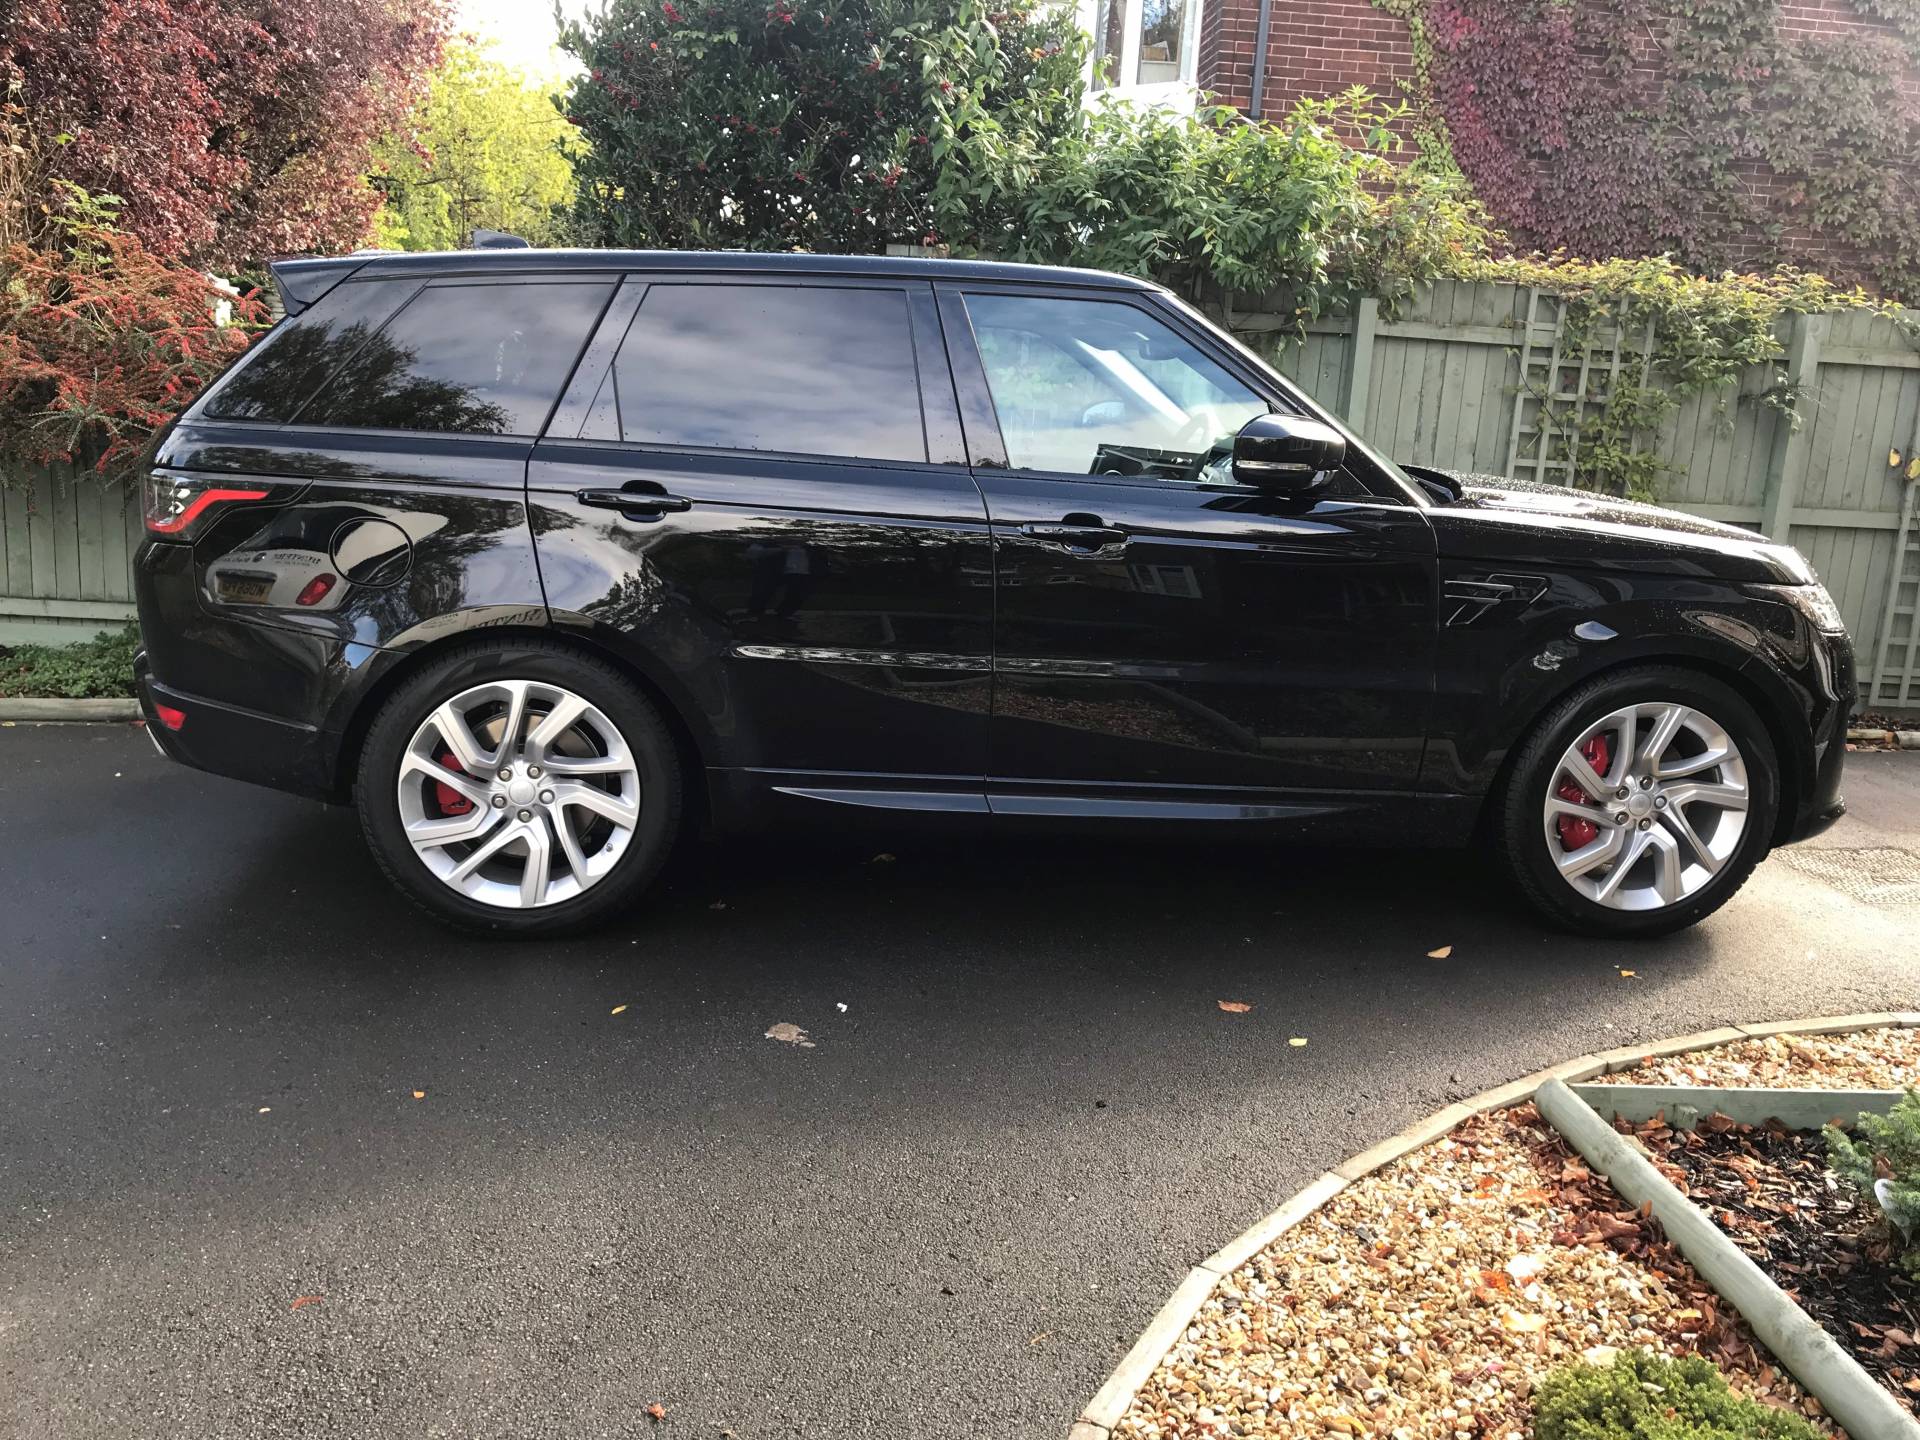 New Range Rover Sport Review